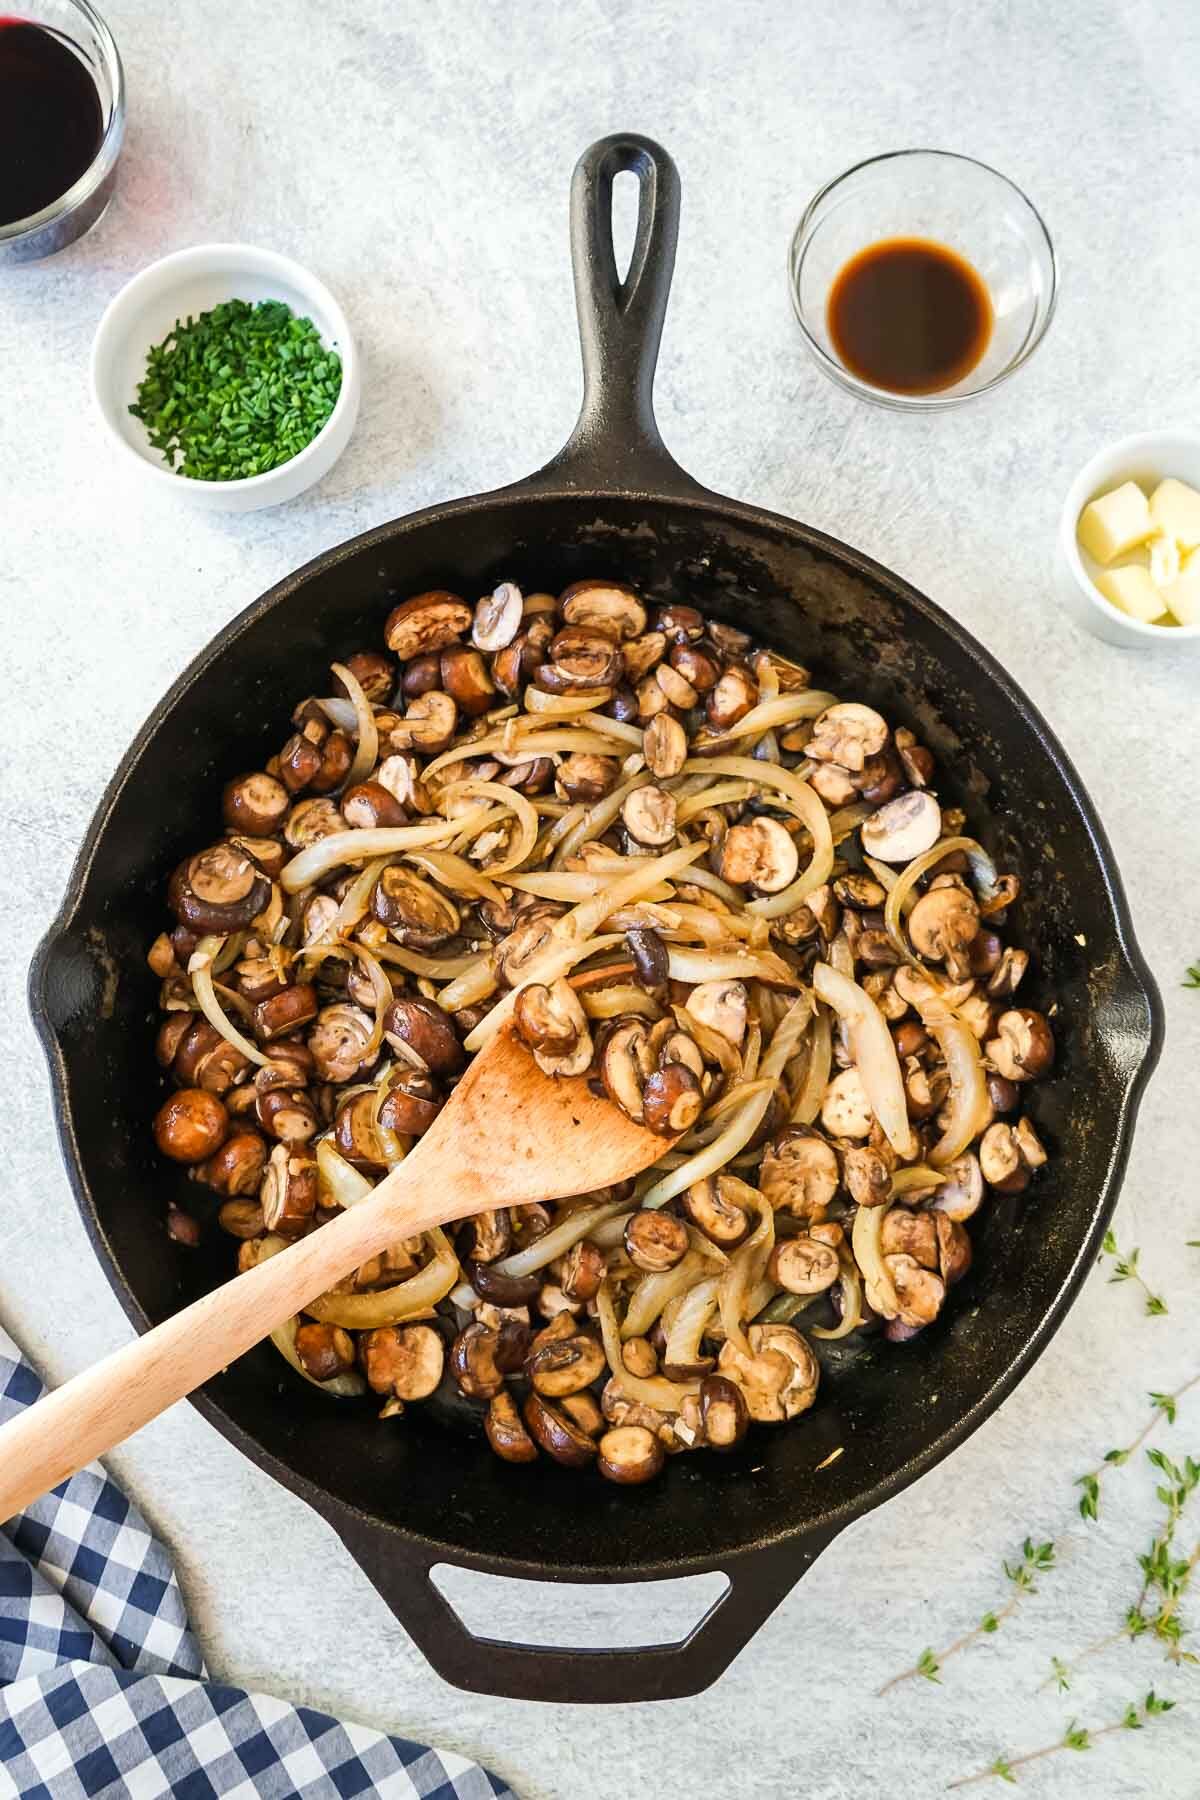 Mushrooms and onions cooking in a large cast iron skillet with a wooden spoon.